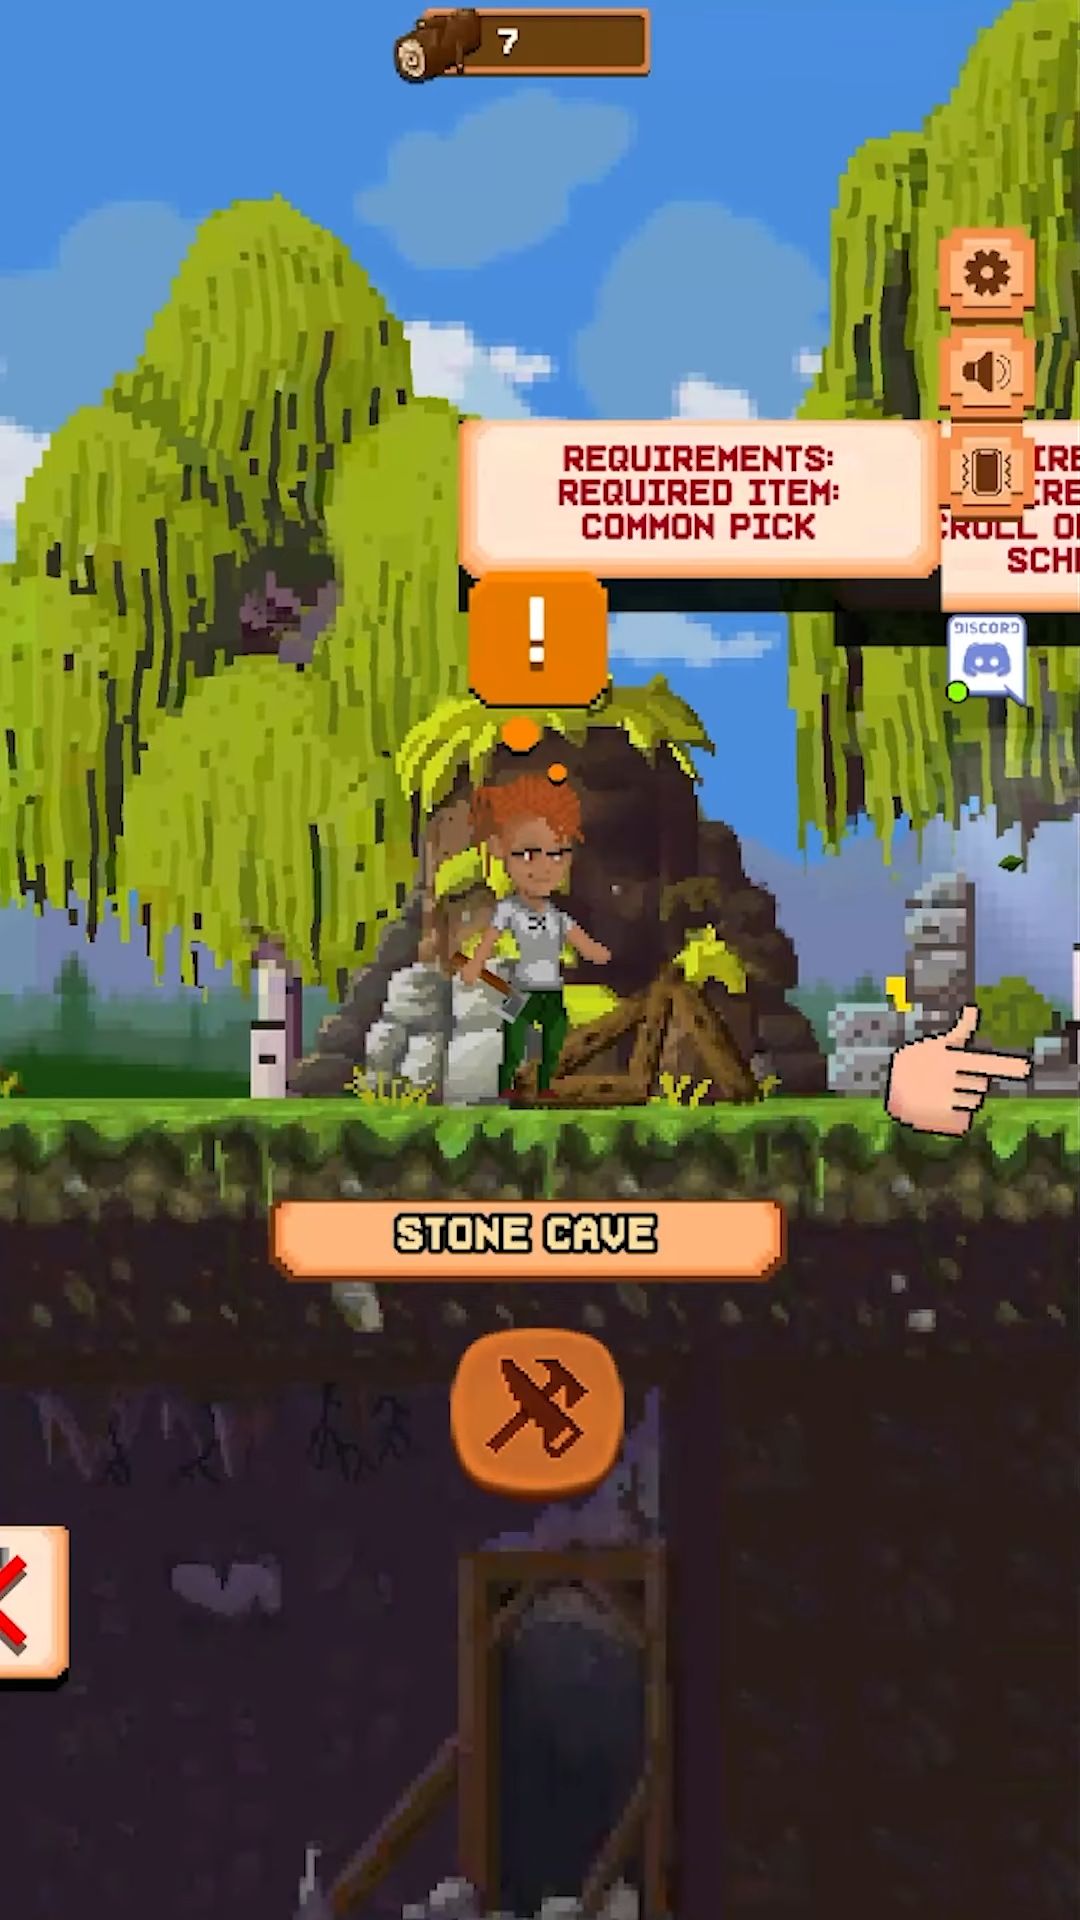 Download Miners Settlement: Idle RPG für Android kostenlos.